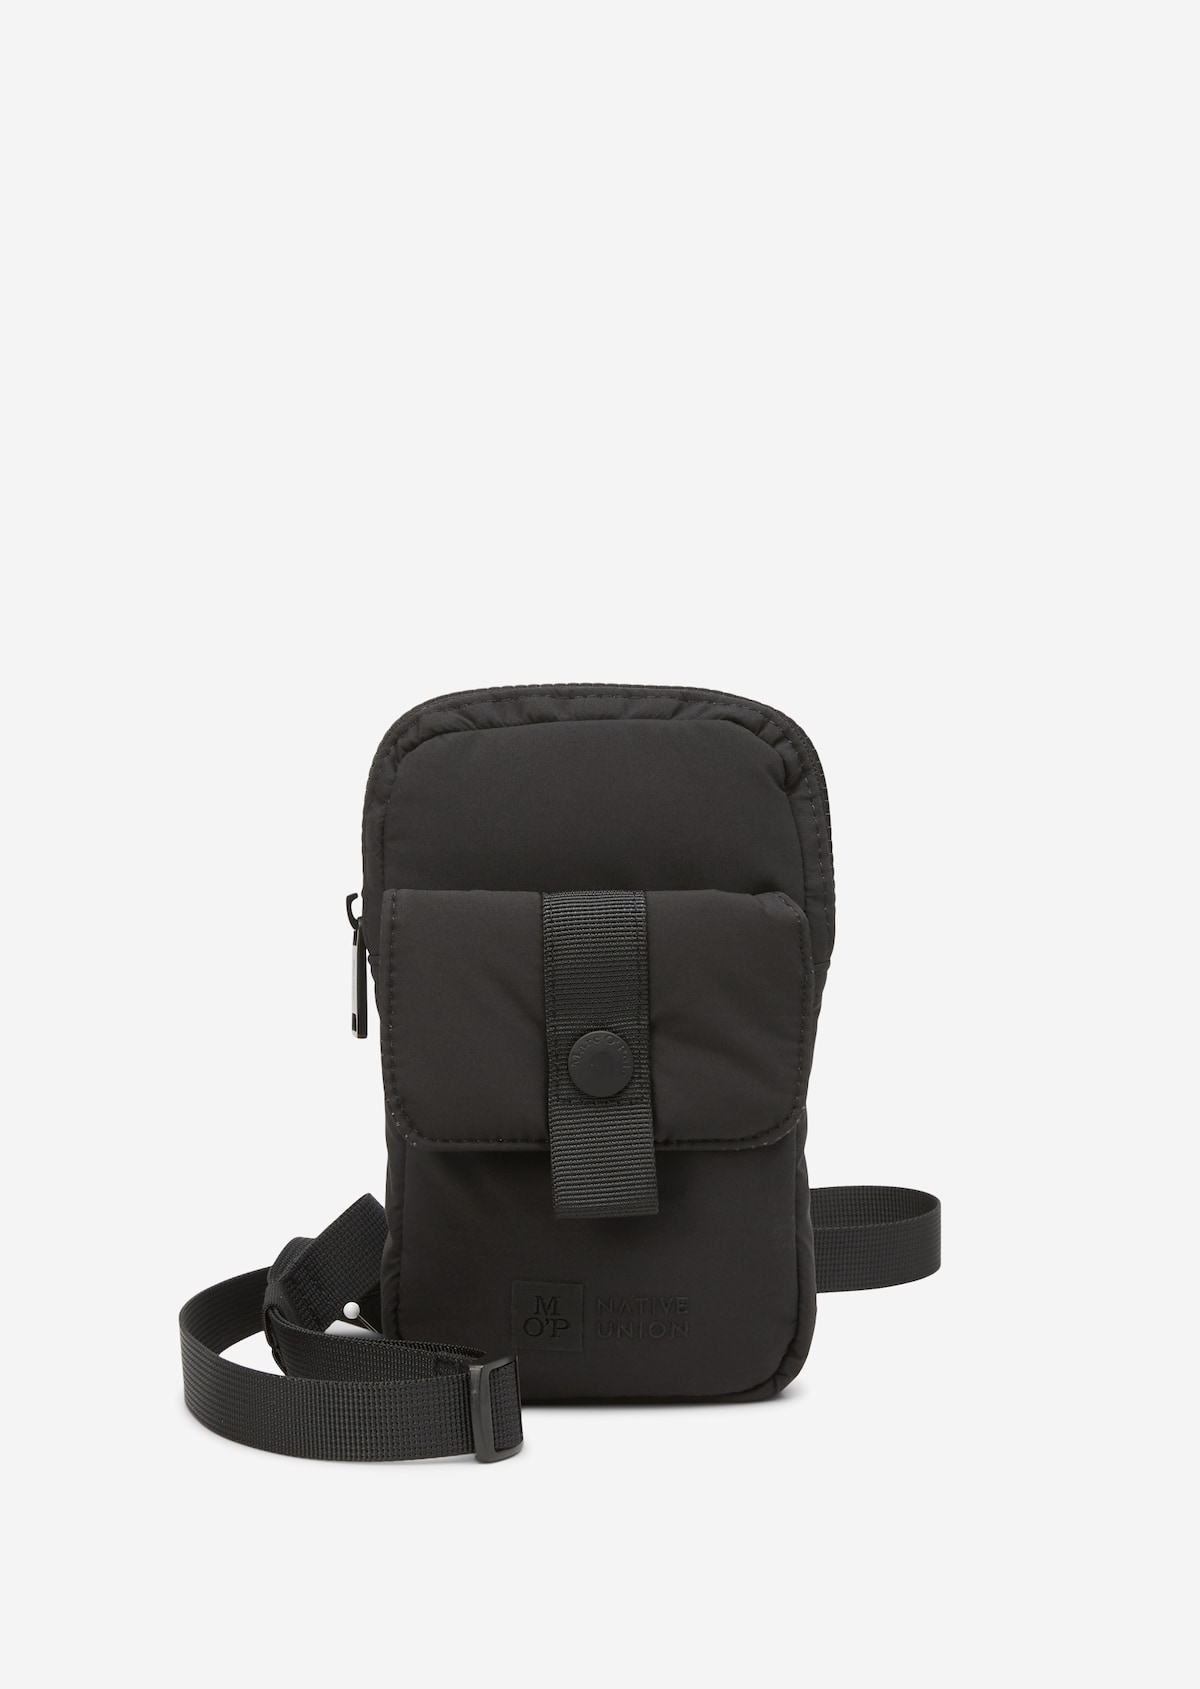 MO'P x NATIVE UNION smartphone bag Made from recycled polyester - black ...